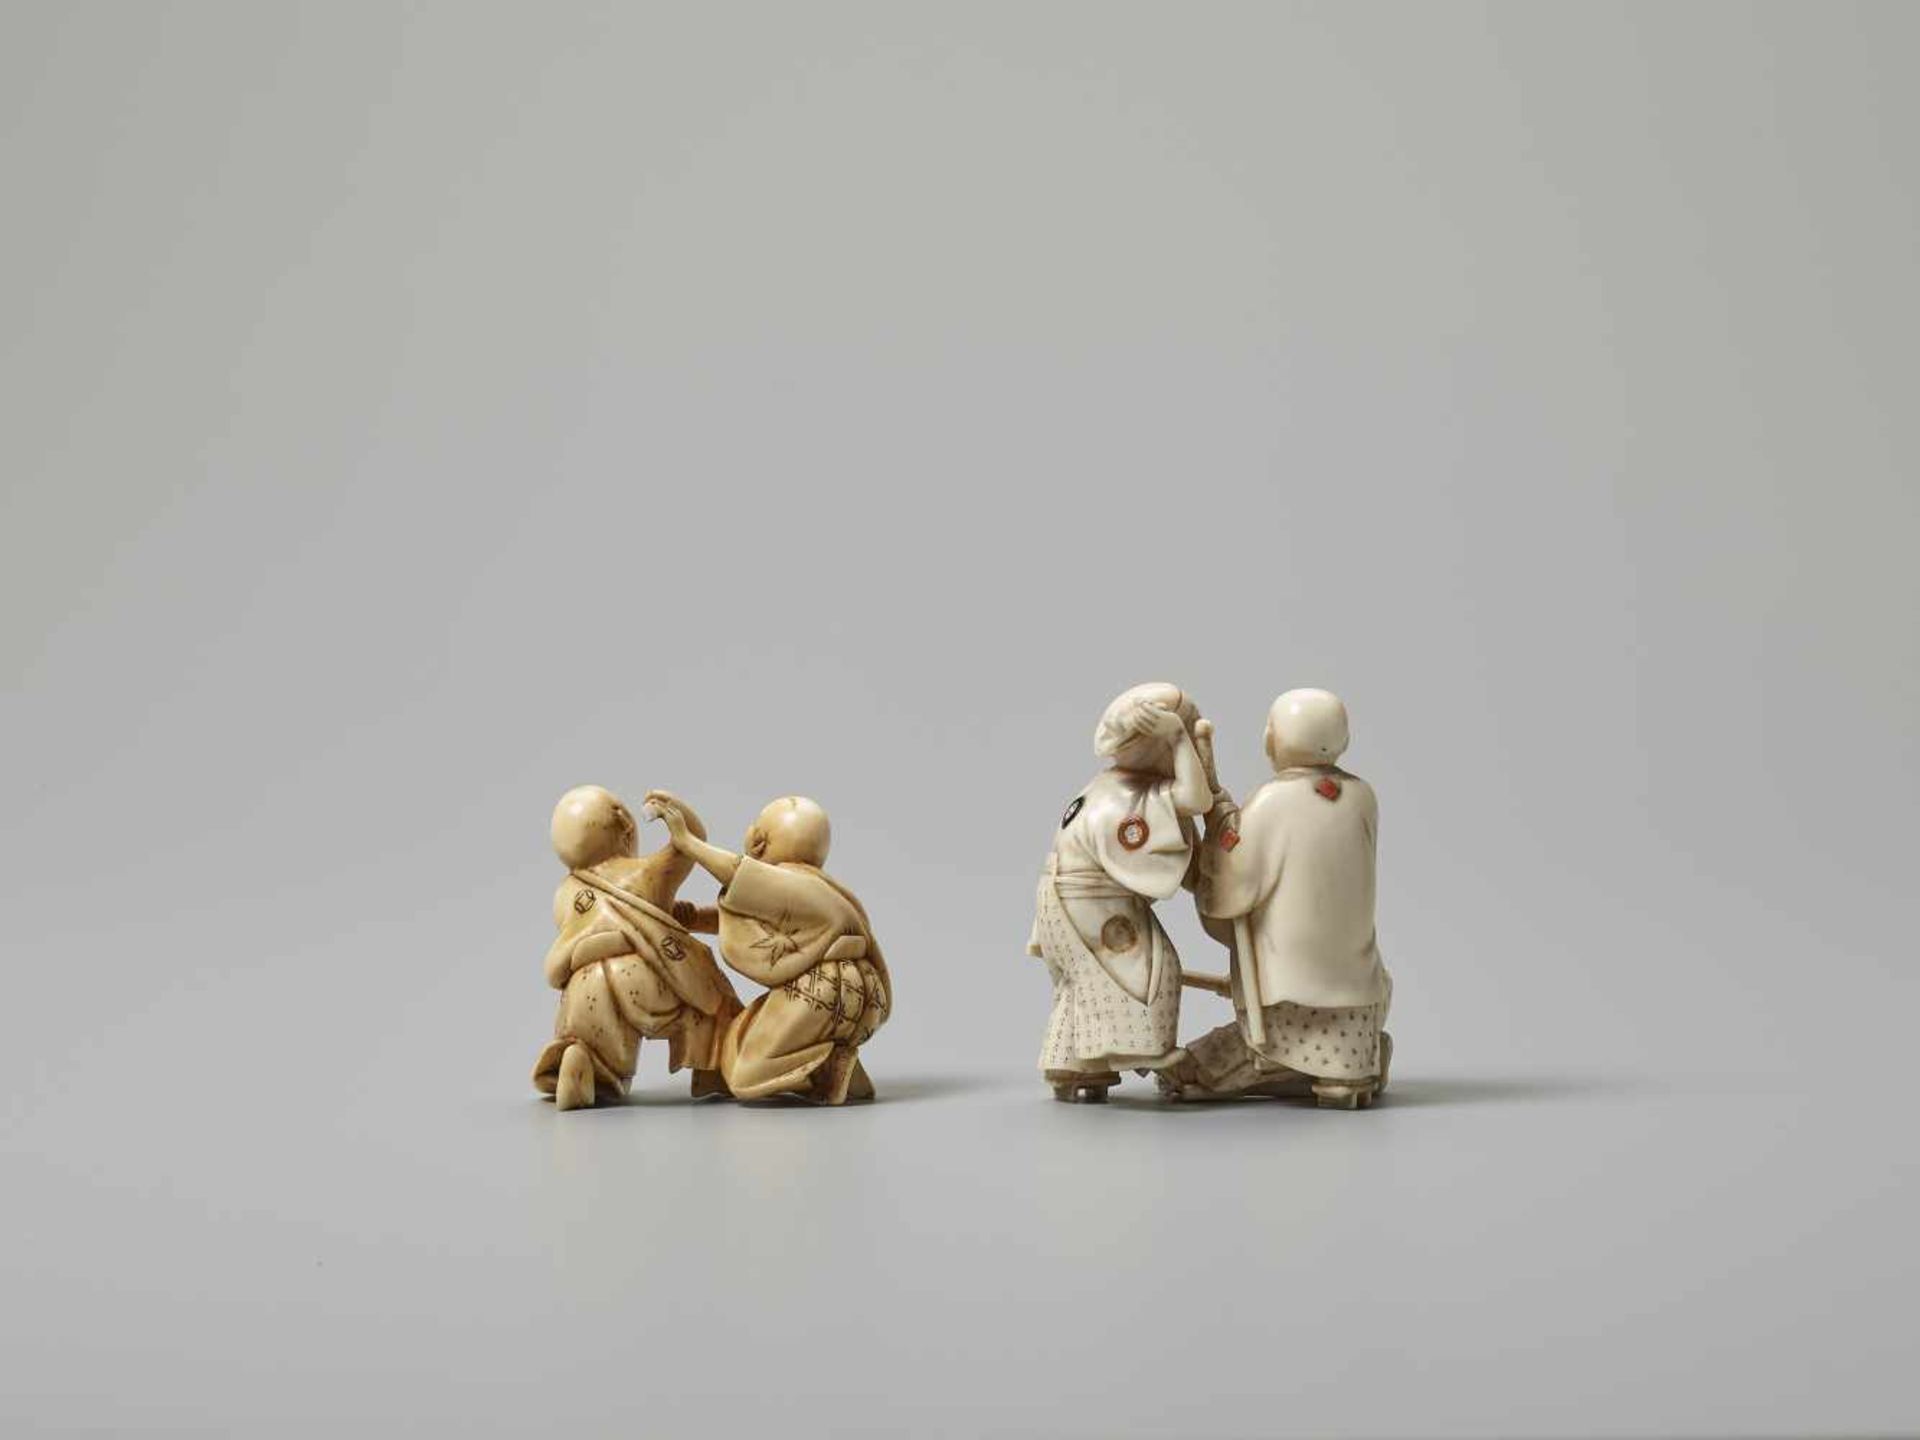 TWO IVORY NETSUKE OF BLIND MEN FIGHTING Unsigned, one with inlaysJapan, Meiji period (1868-1912) - Image 2 of 3